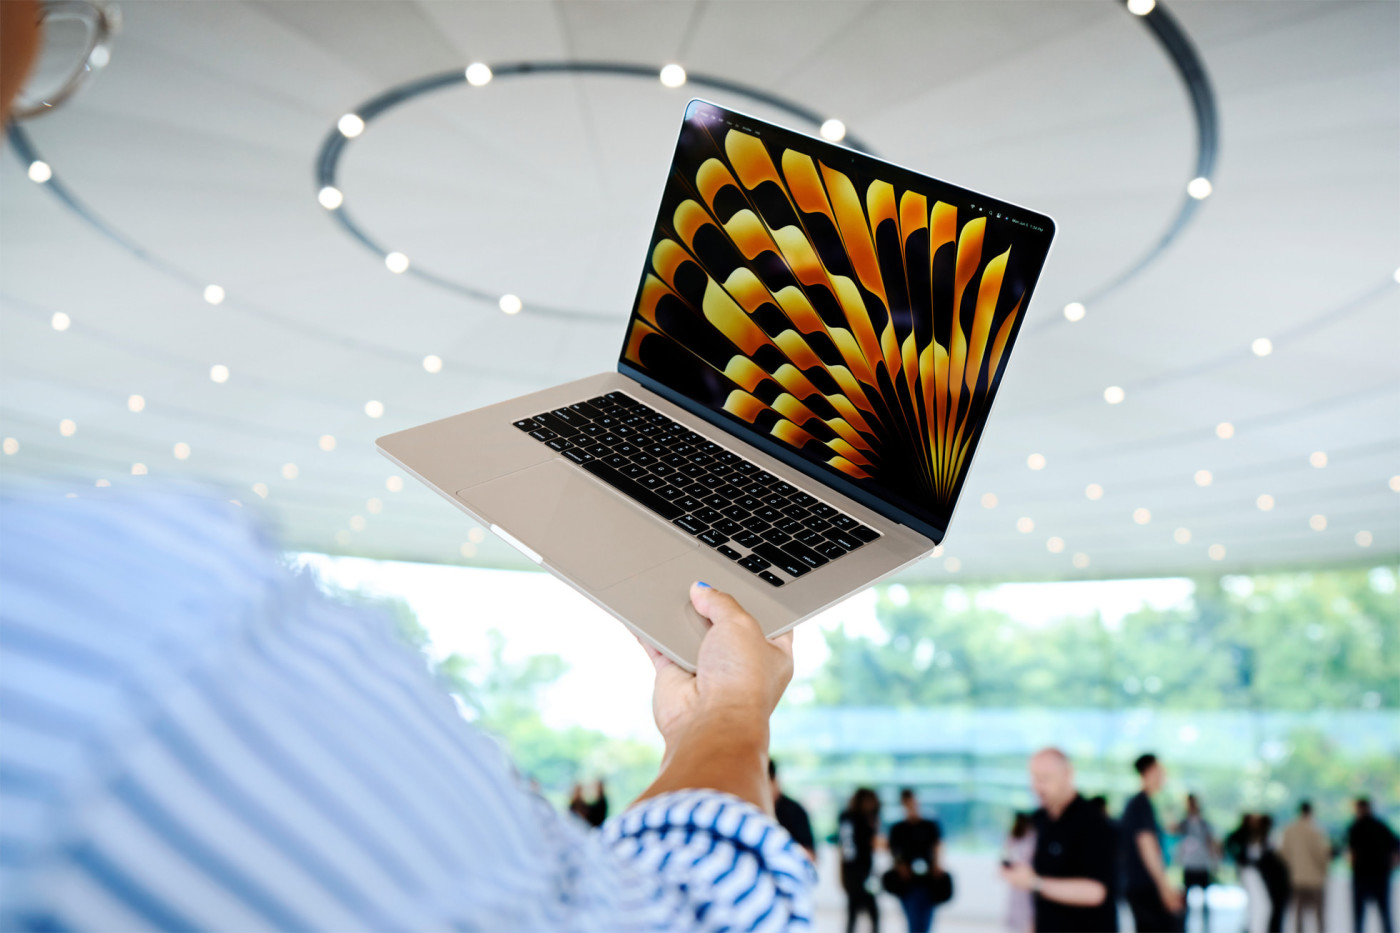 15-inch MacBook Air with 256GB has slower SSD than other models